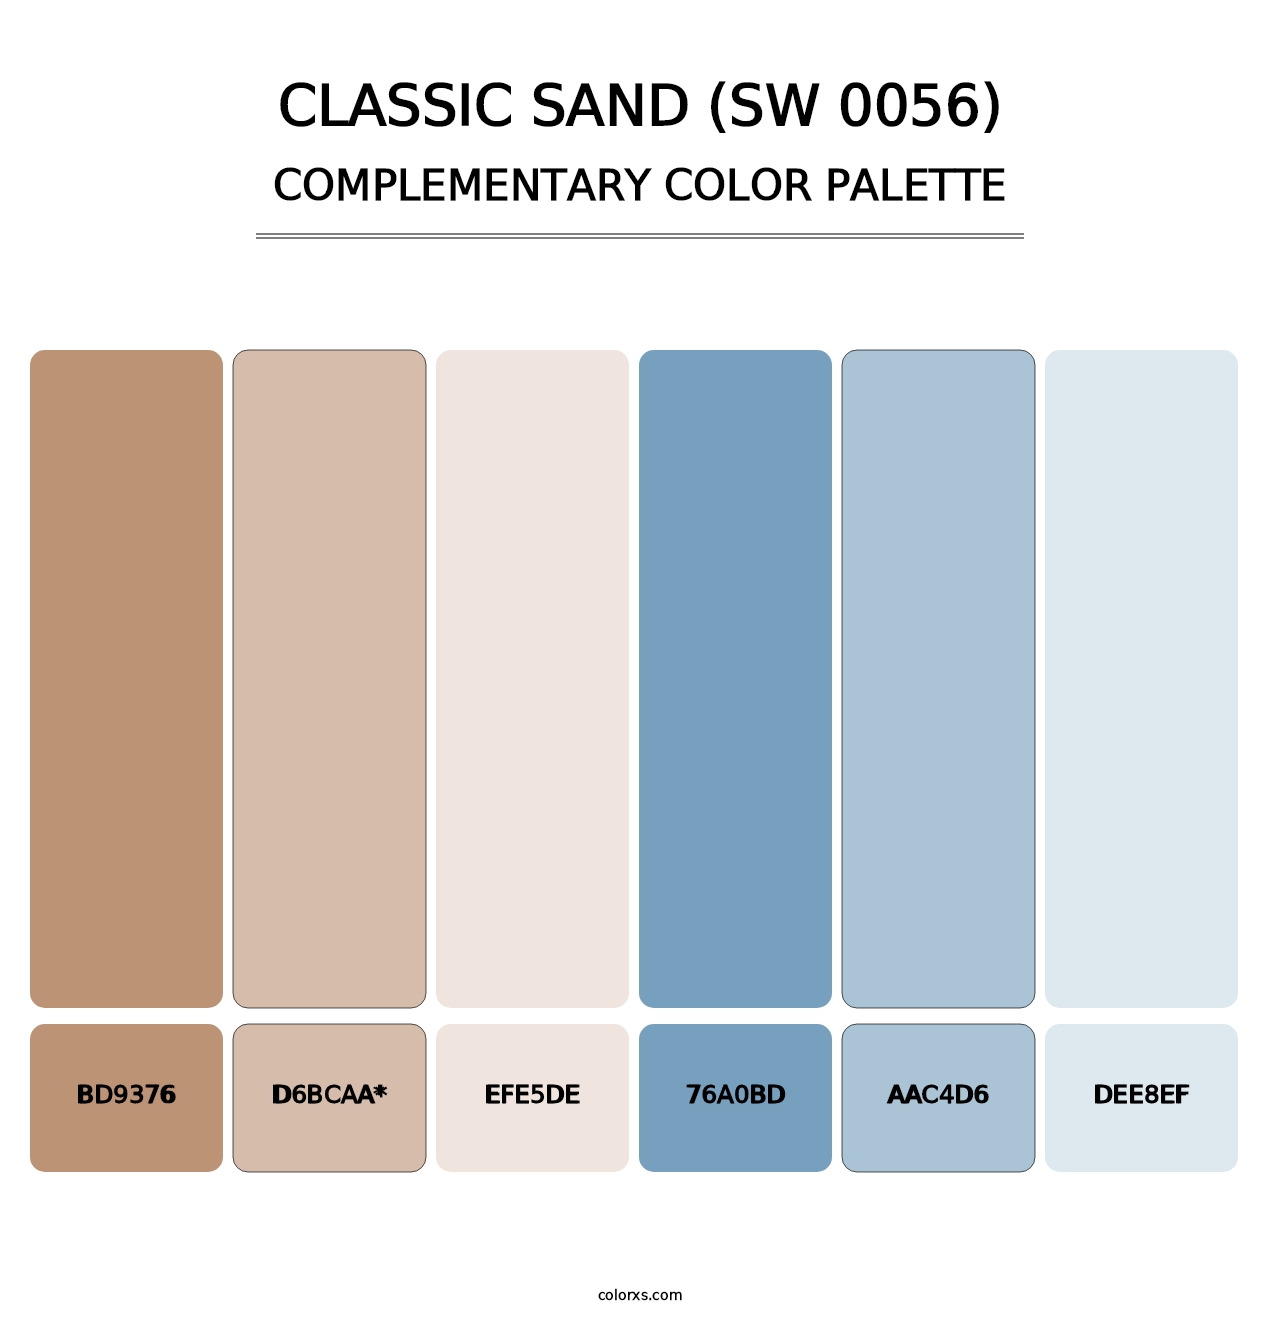 Classic Sand (SW 0056) - Complementary Color Palette